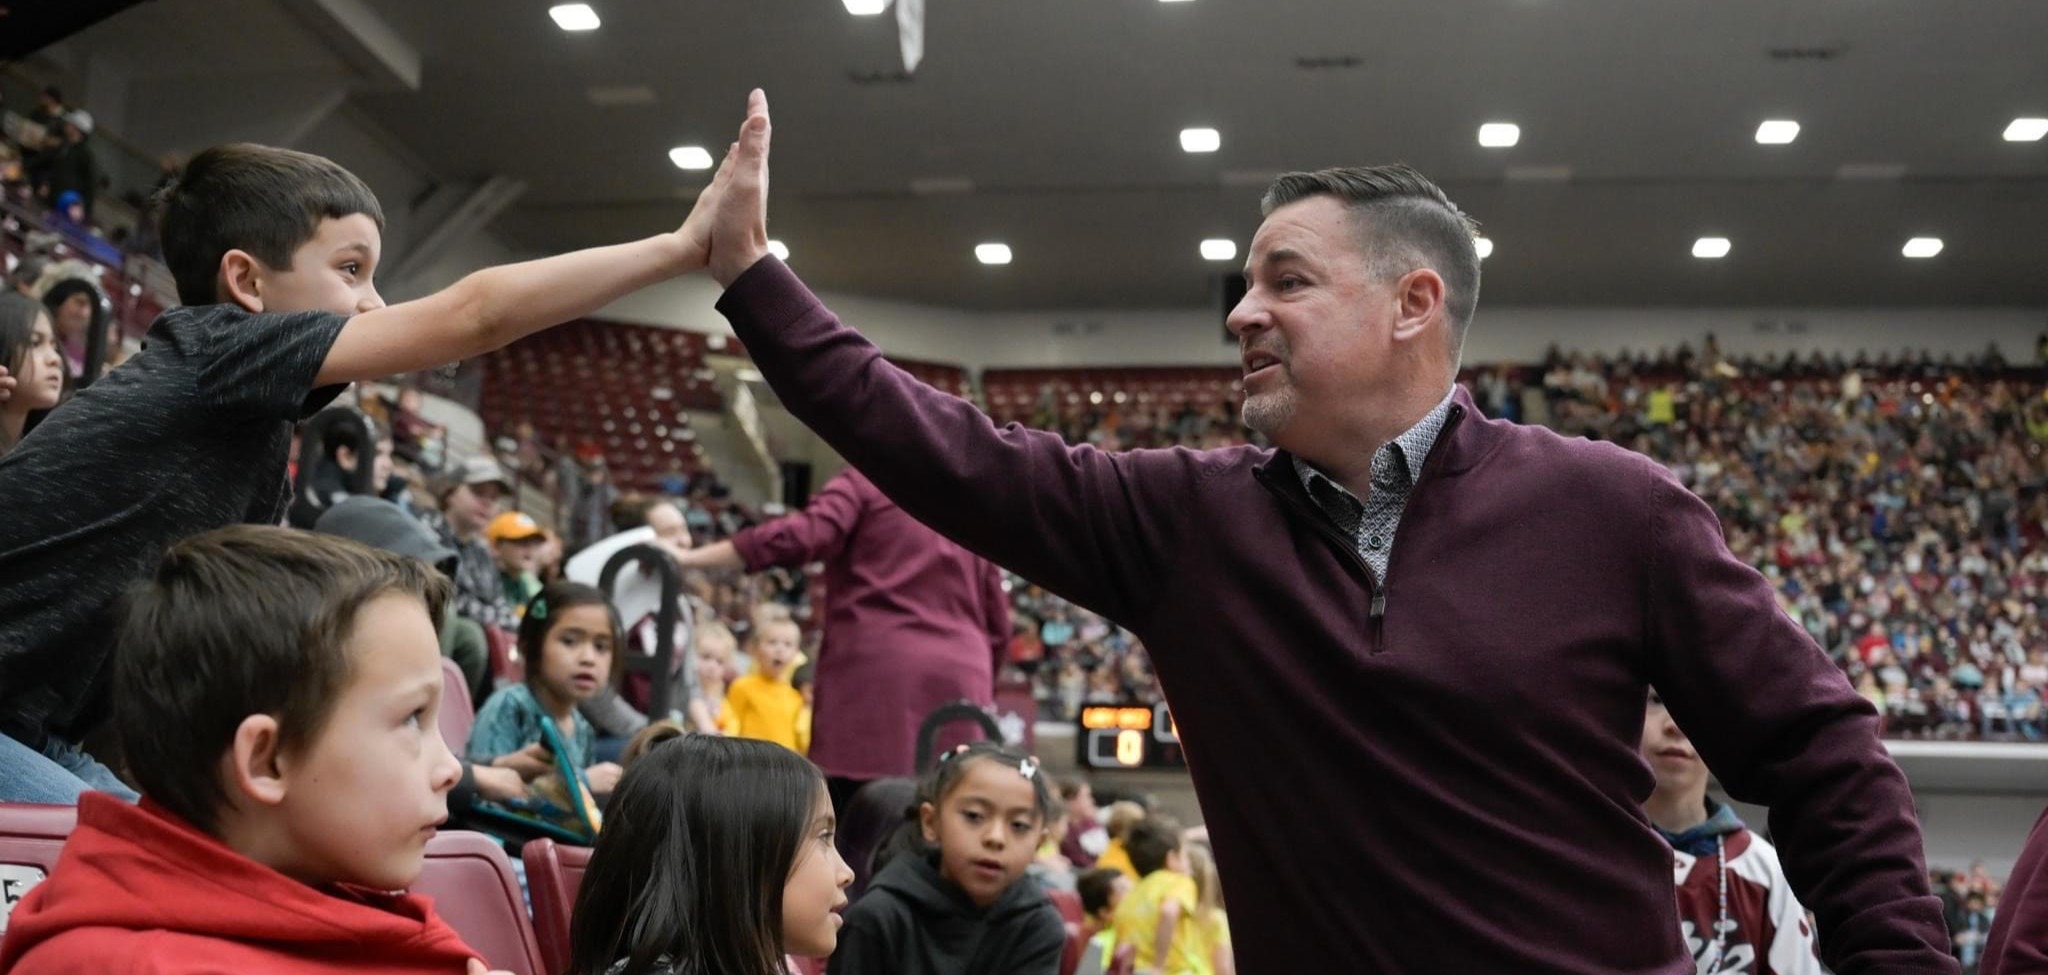 Eddy high fives the Lady Griz Coach on his 50th game win as his classmates look on.